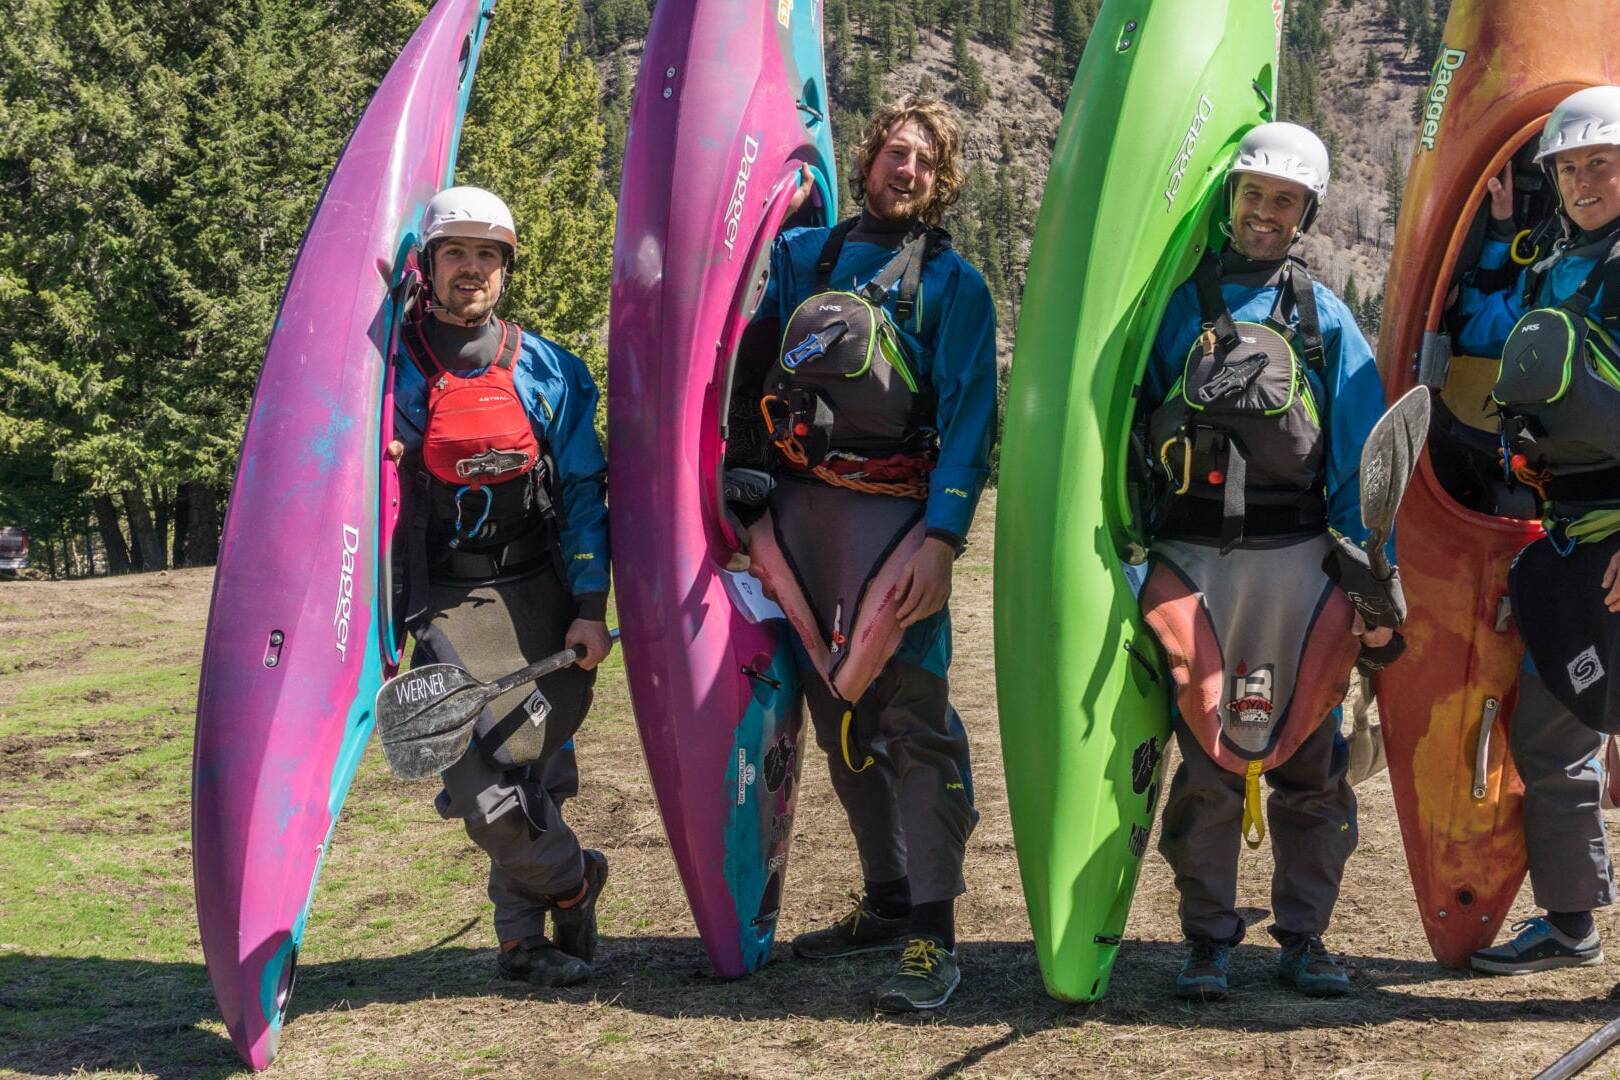 A Beginners Guide to Whitewater Kayaking Gear - Kootenay Mountain Culture